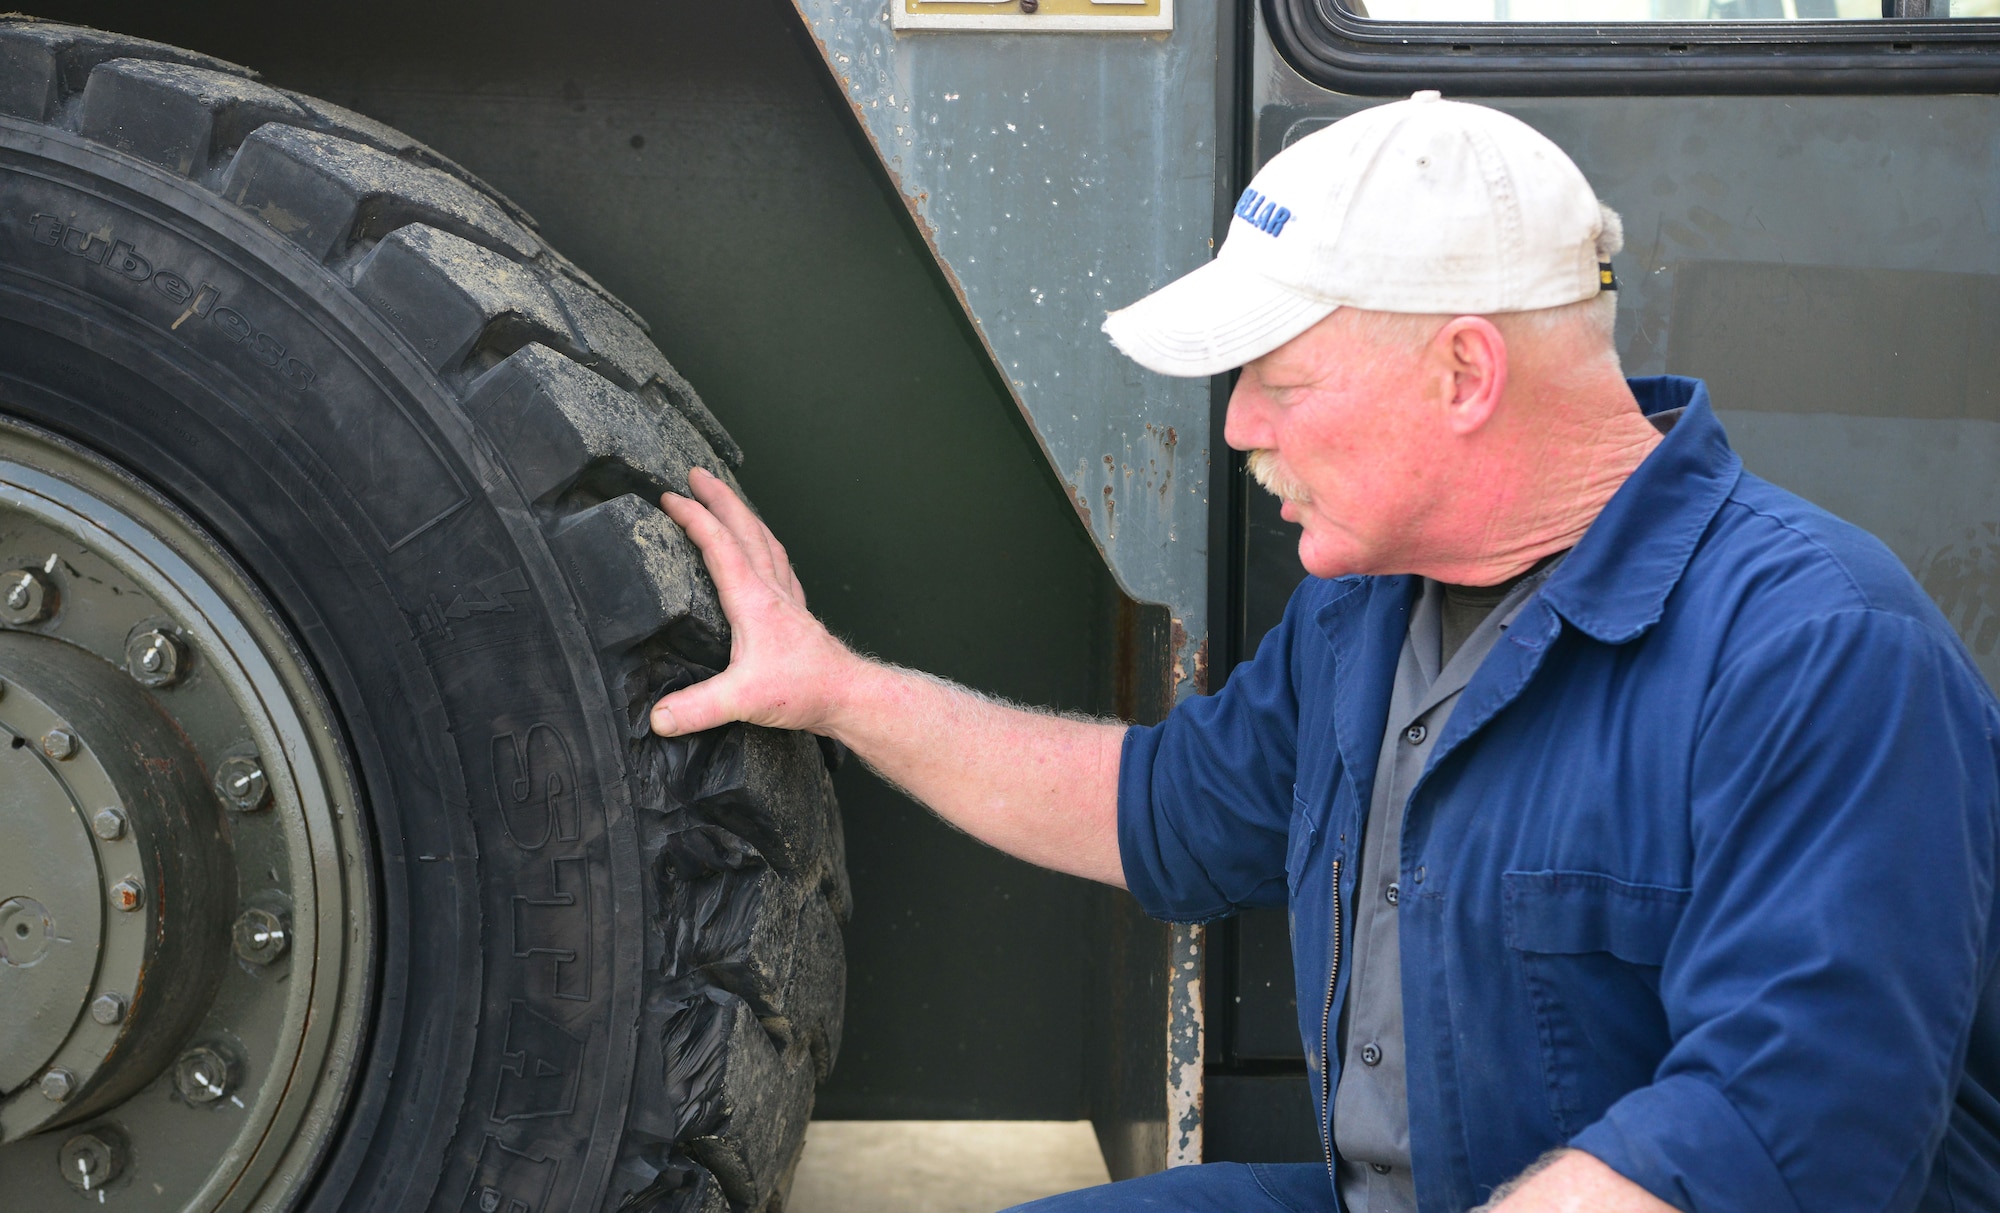 Darryl Crady, 9th Support Division heavy mobile equipment mechanic, inspects a damaged tire